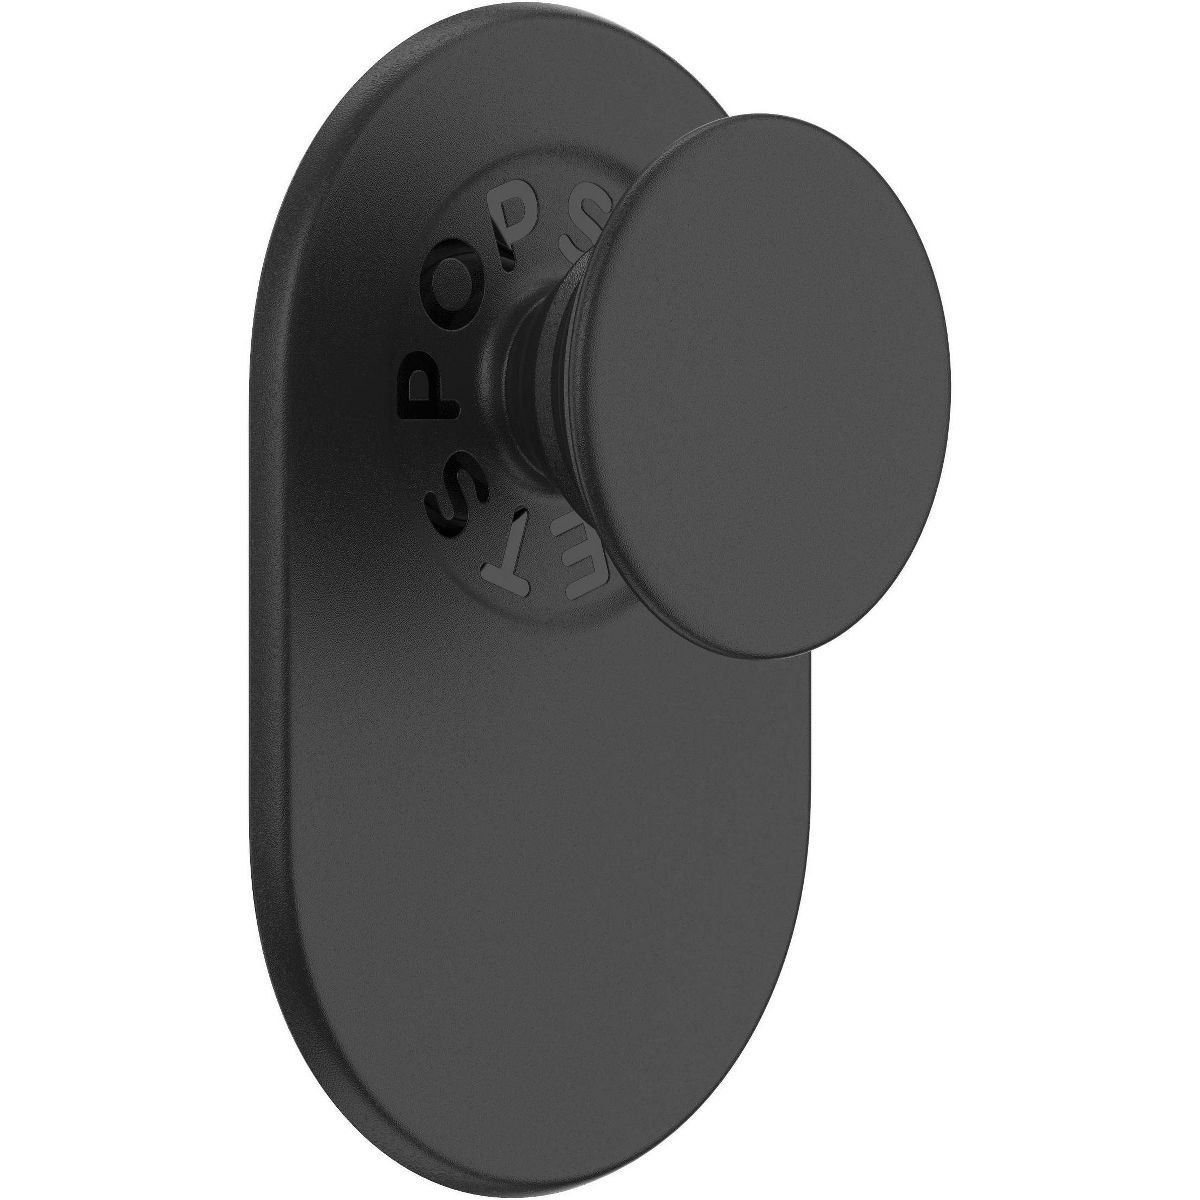 PopSockets PopGrip Cell Phone Grip & Stand with MagSafe | Target